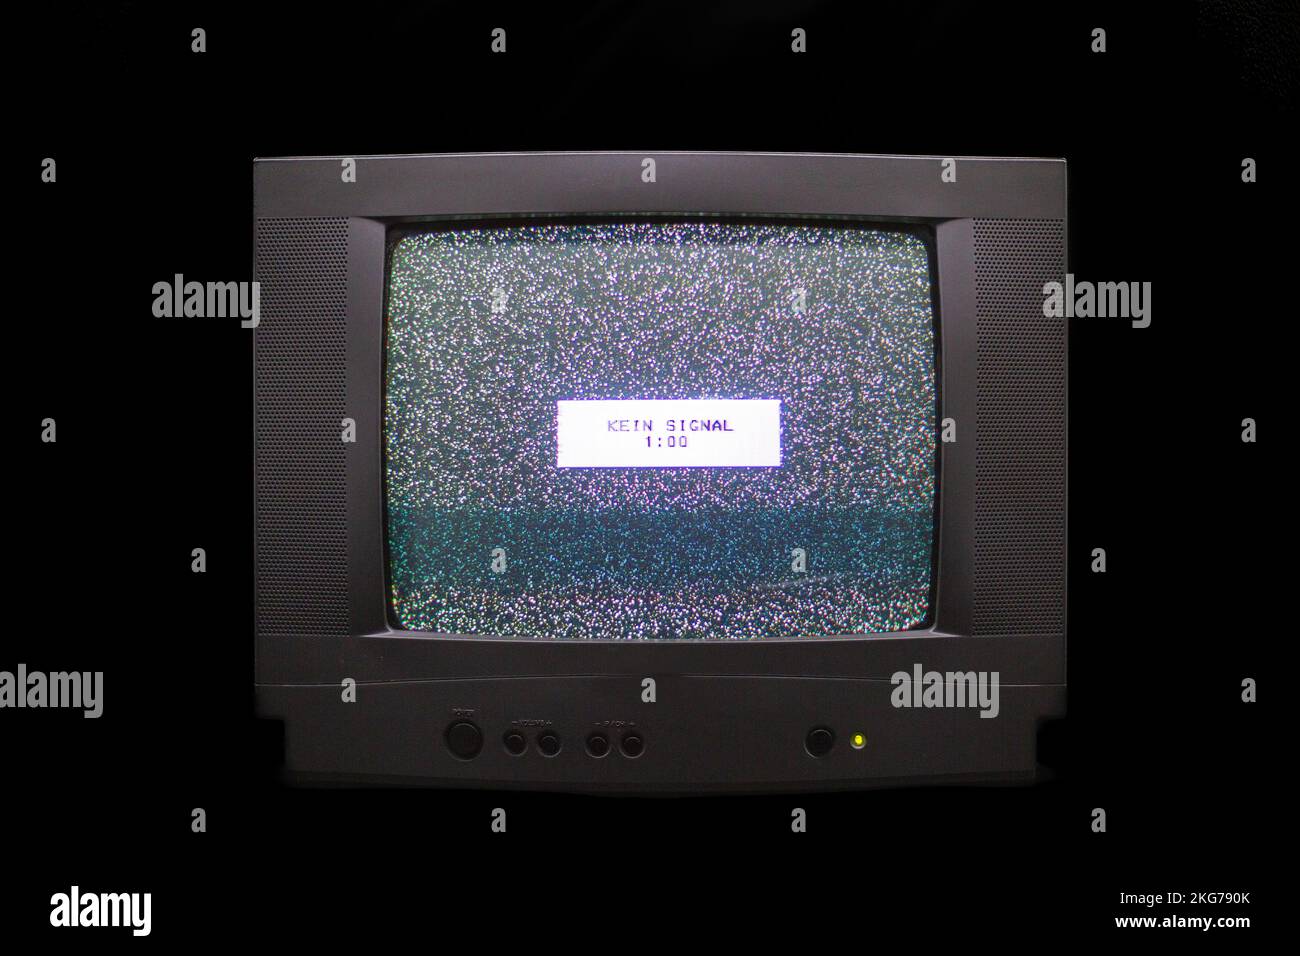 No signal on old television. 'No signal' written in German Stock Photo